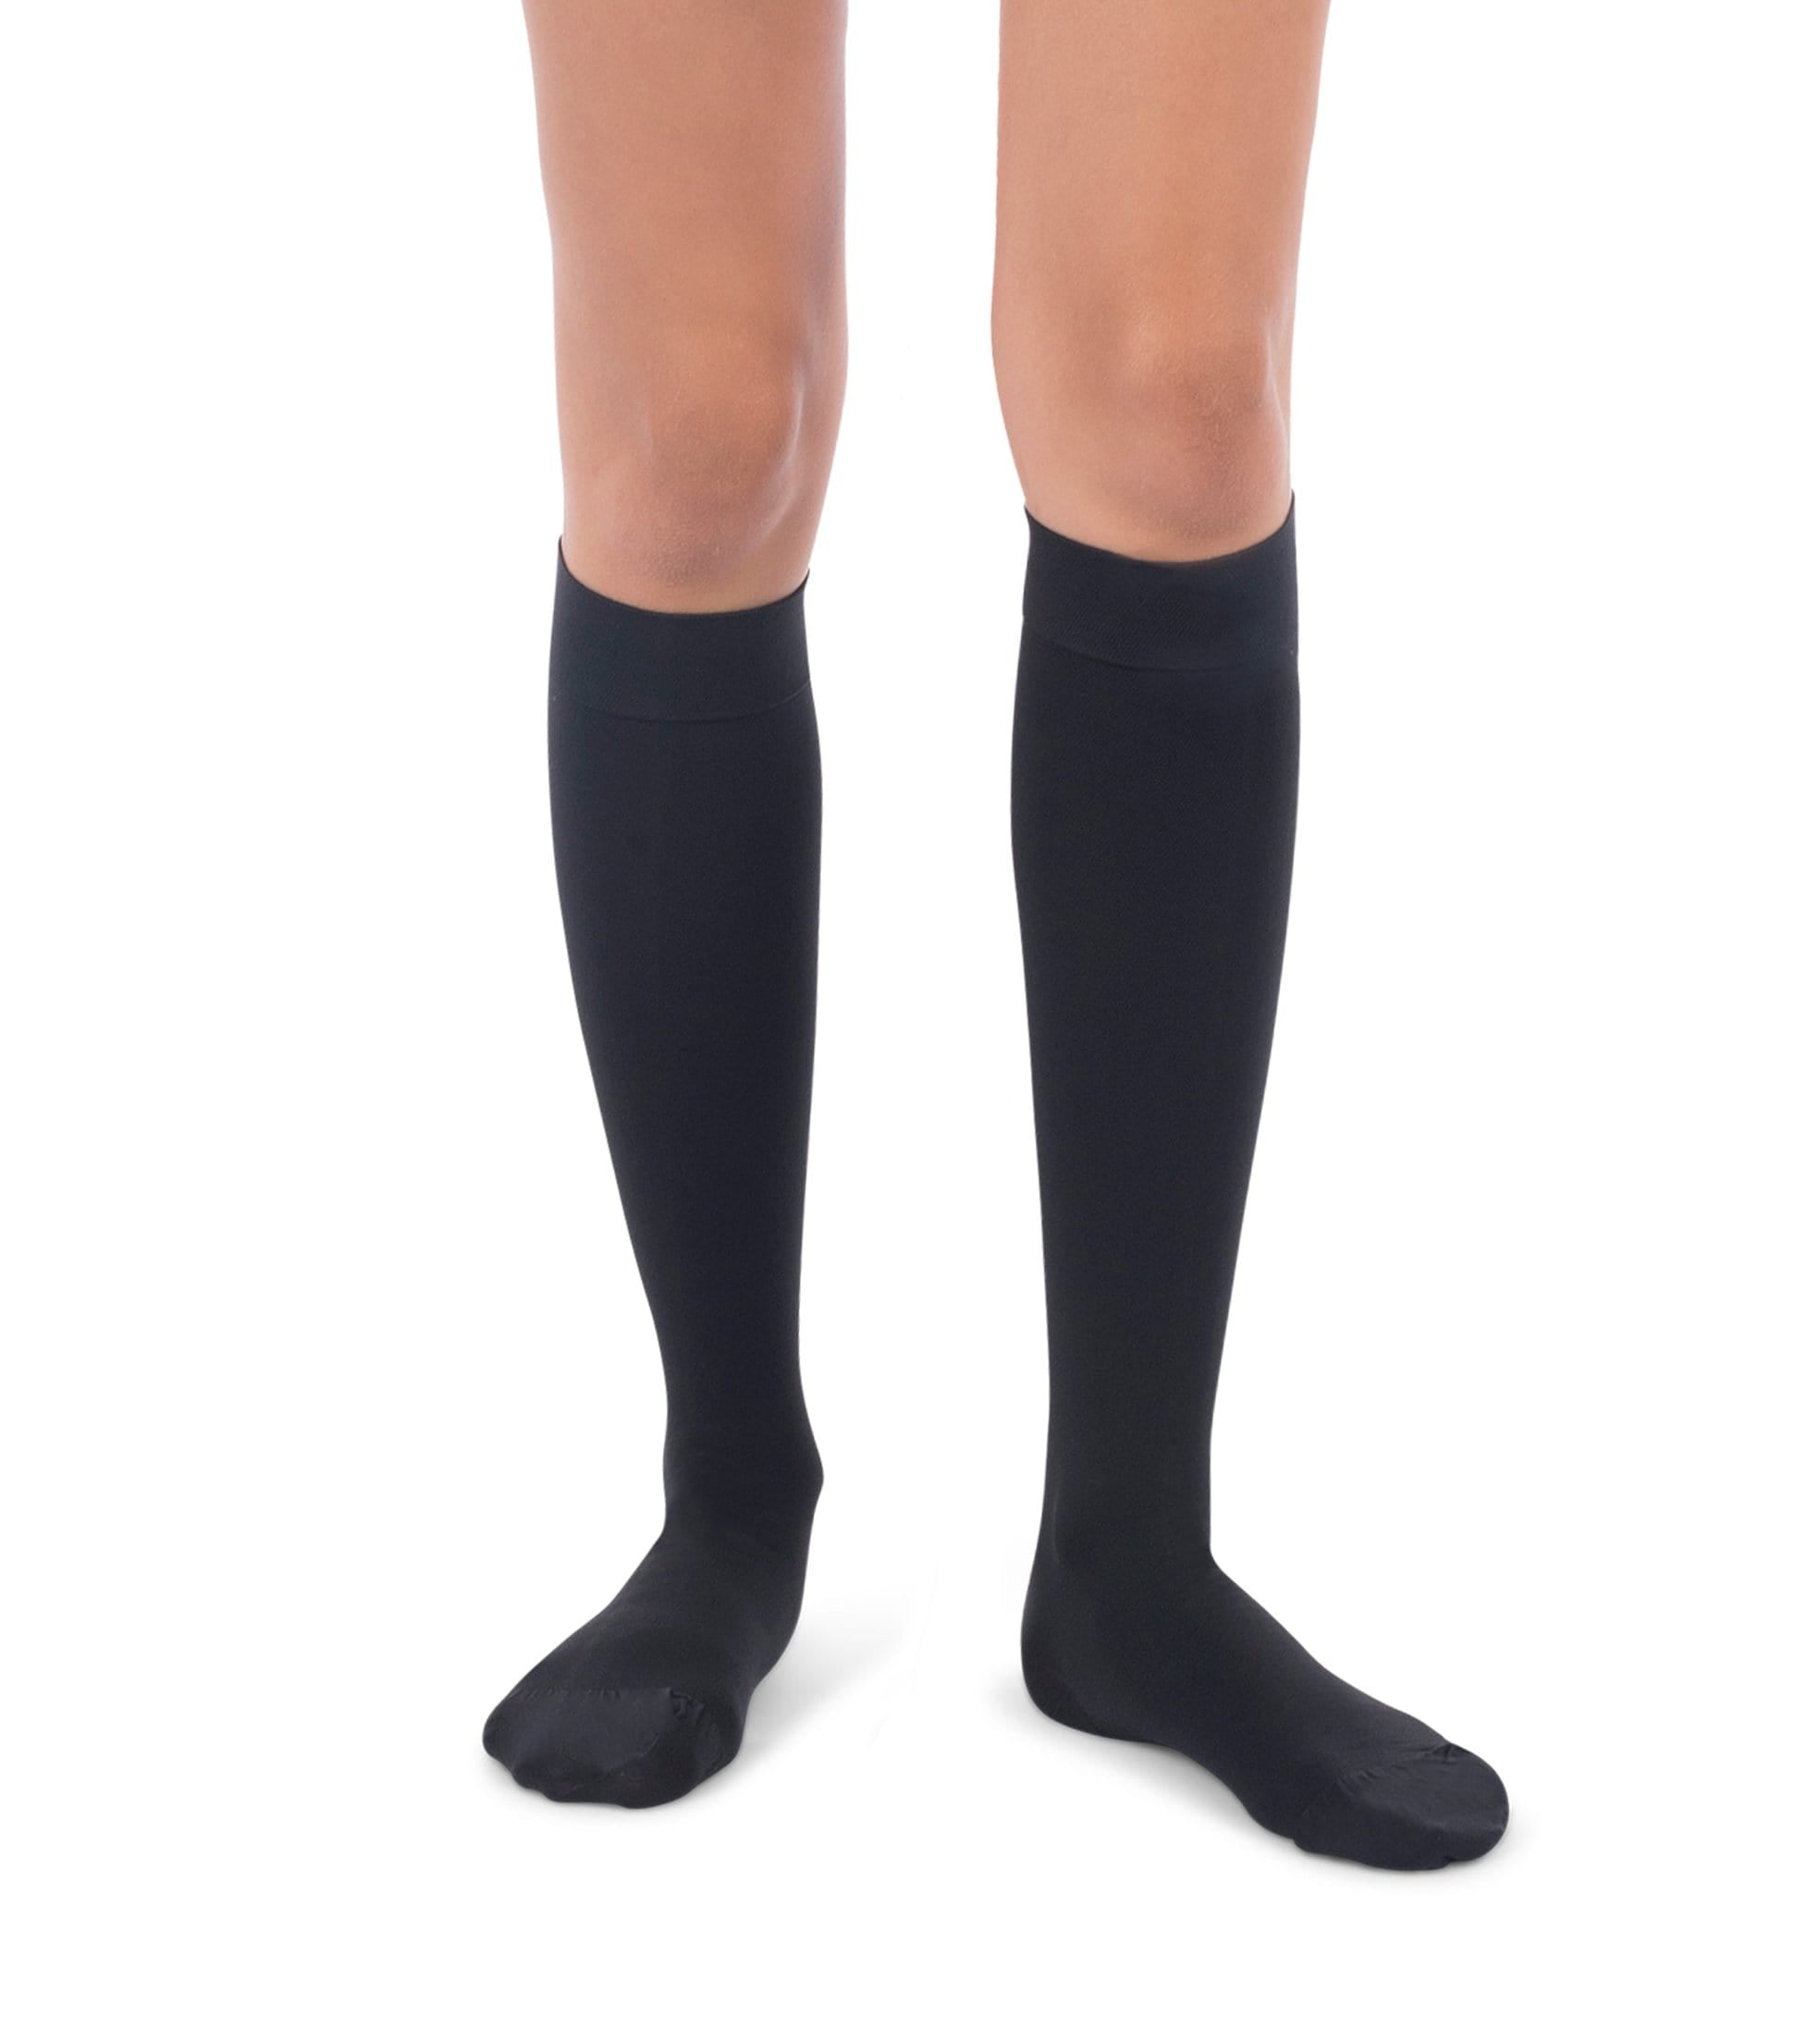 JOMI Knee High Compression Stockings, 30-40mmHg Surgical Weight Closed Toe 320 - Black / XX-Large